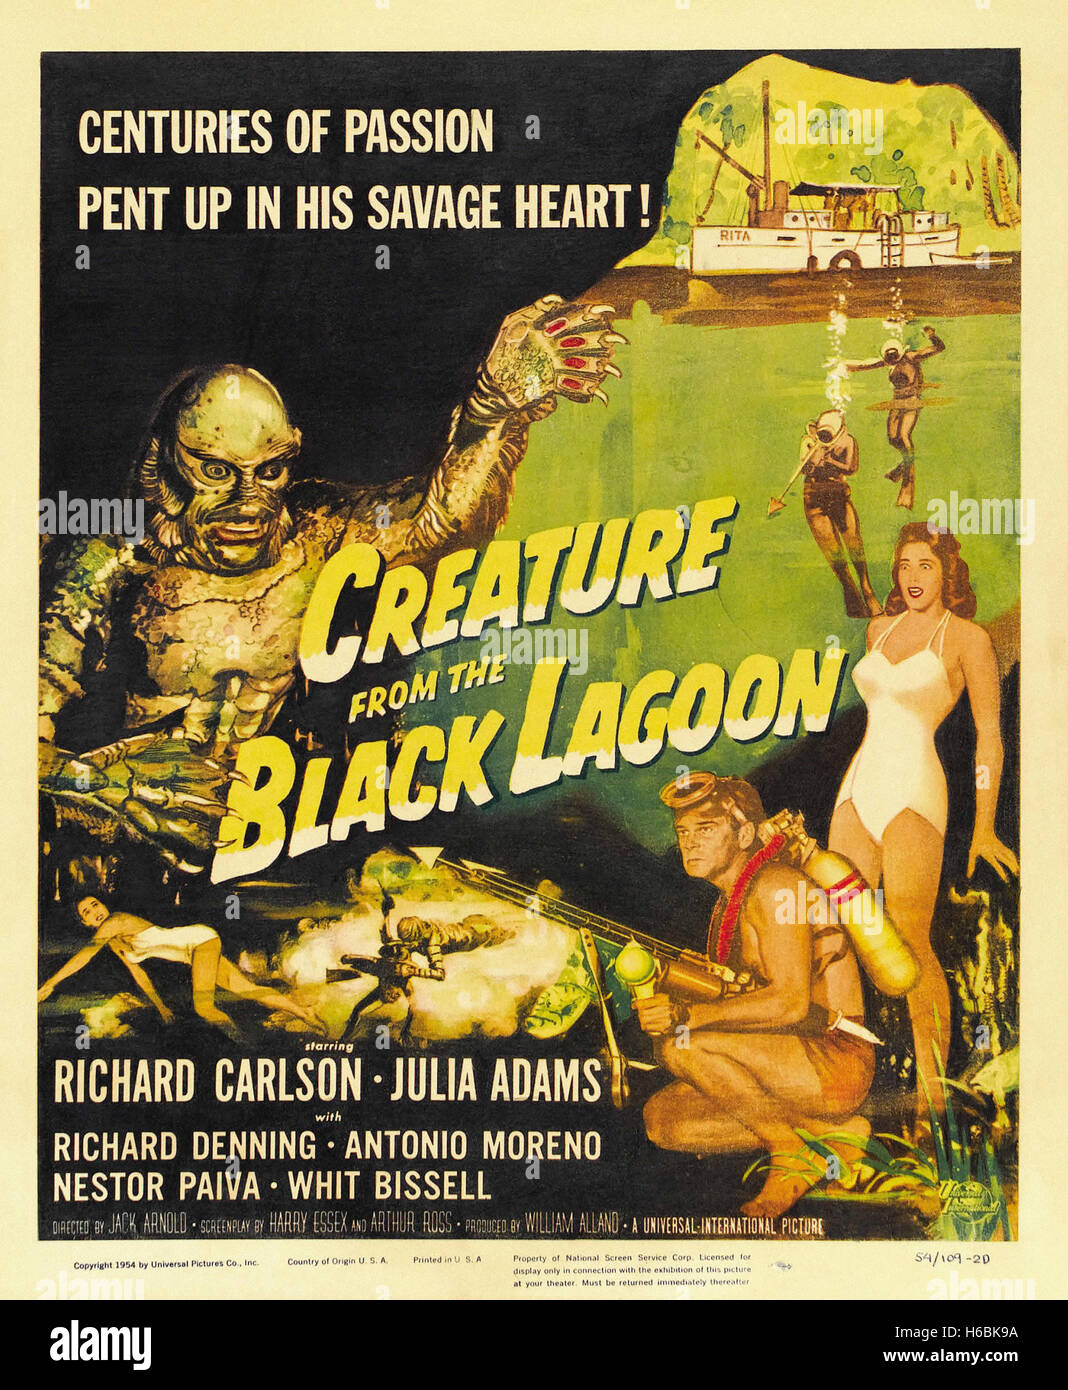 Creature From The Black Lagoon  - Movie Poster - Stock Photo